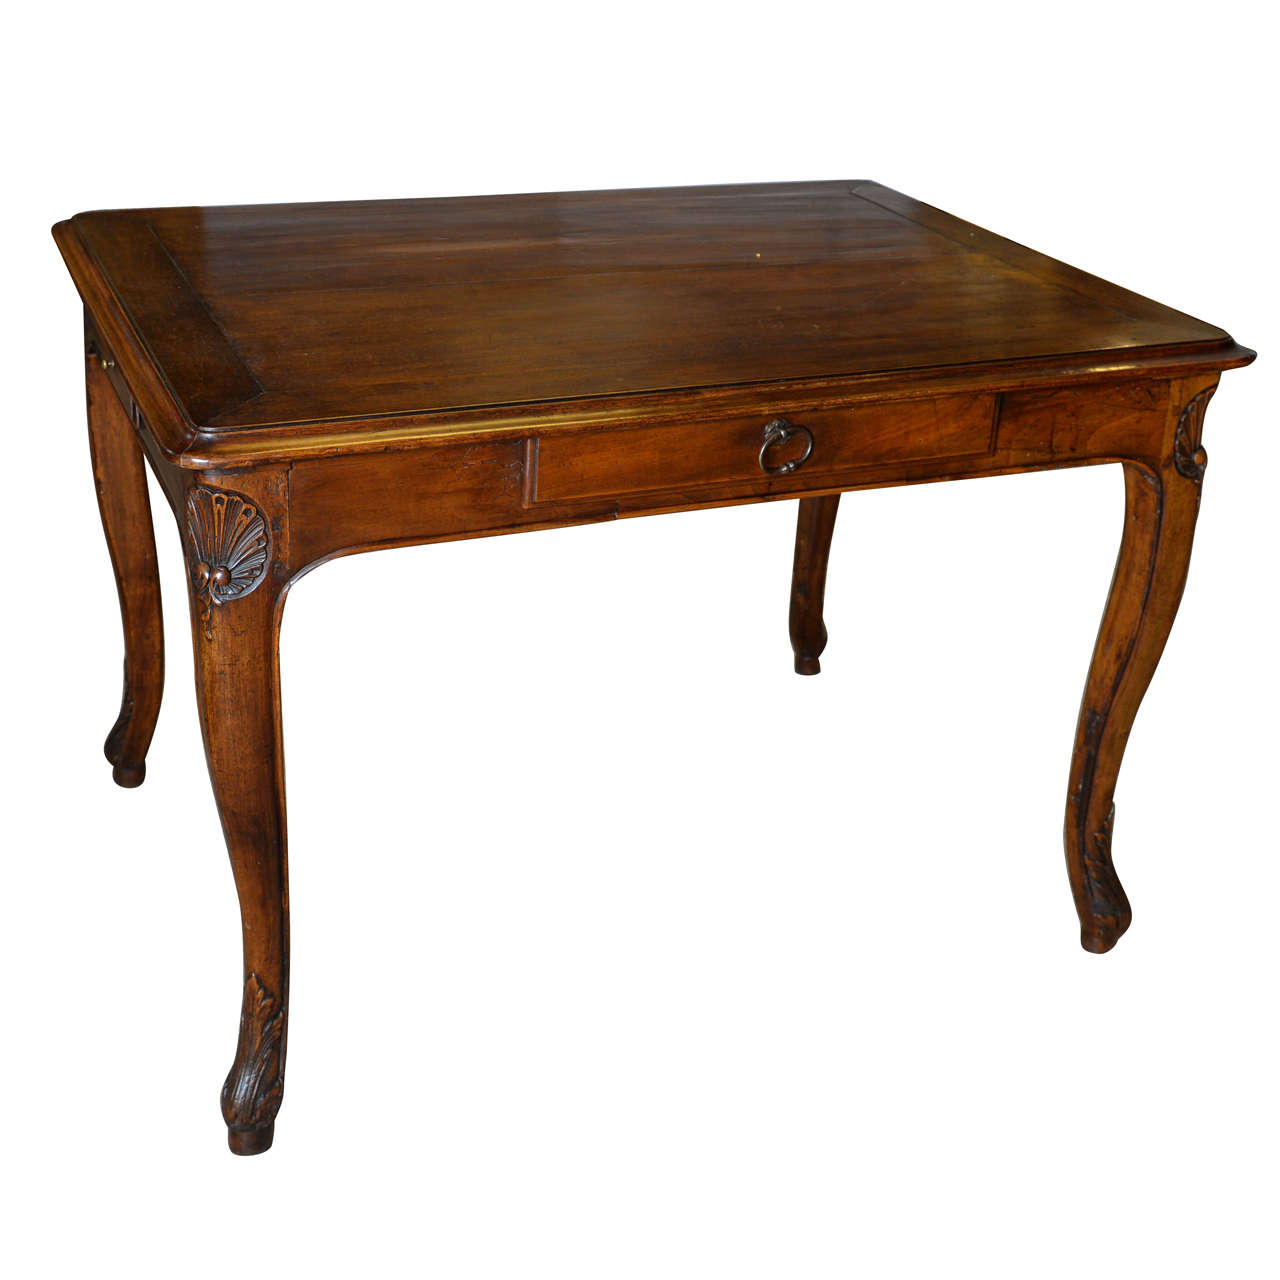 18th Century Regence Period Table from Lyon